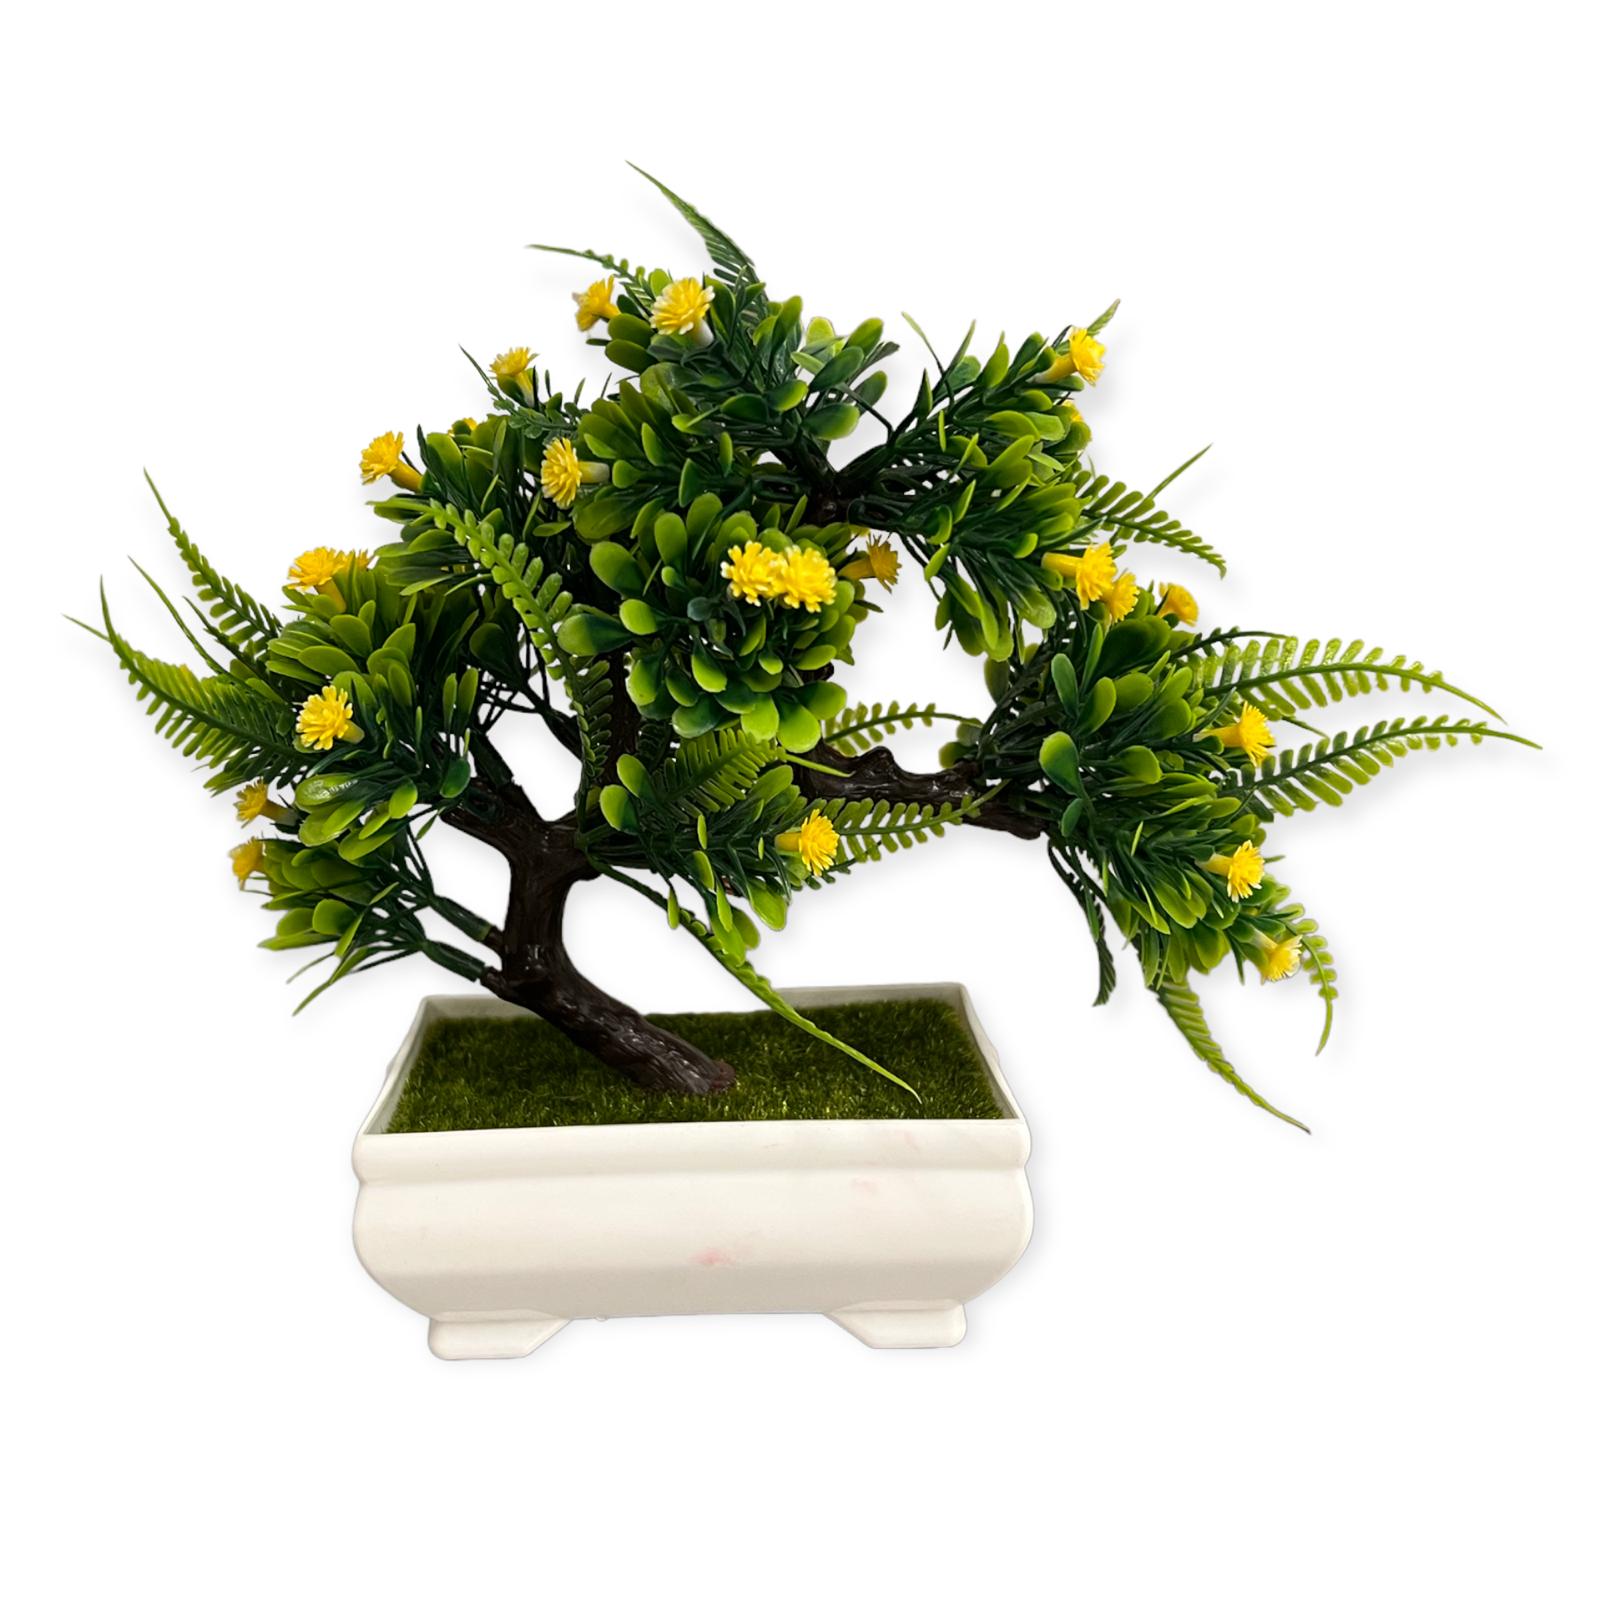 Artificial : Green Bonsai, Different Colored Flowers